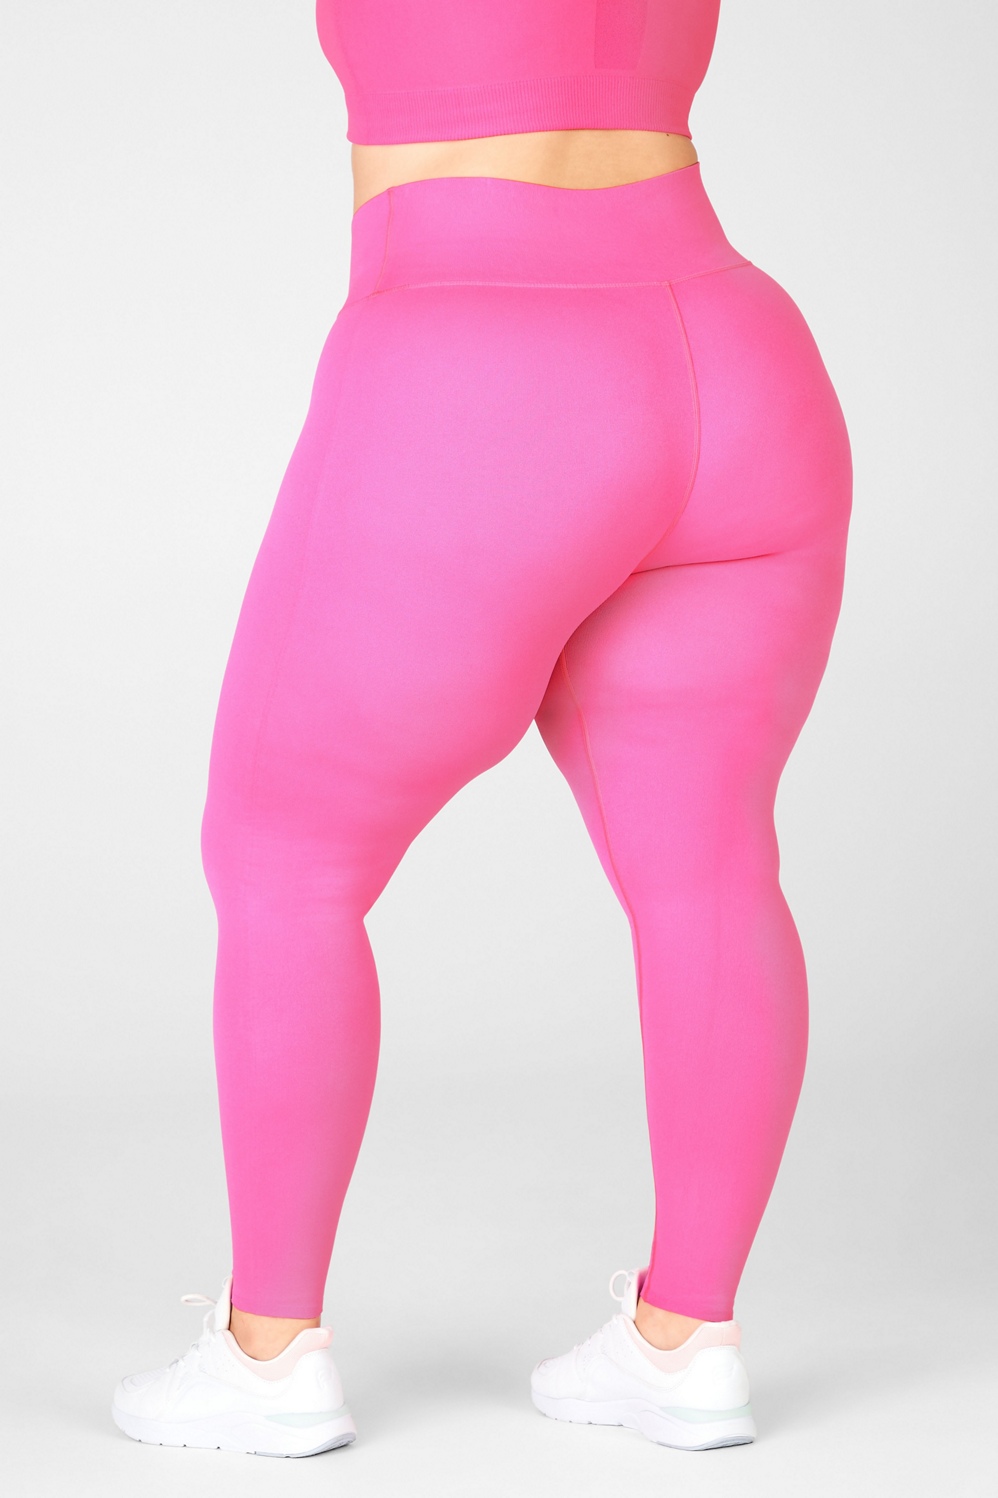 HMGYH satina high waisted leggings for women Solid Wide Leg Pants (Color :  Hot Pink, Size : 3XL) : Buy Online at Best Price in KSA - Souq is now  : Fashion